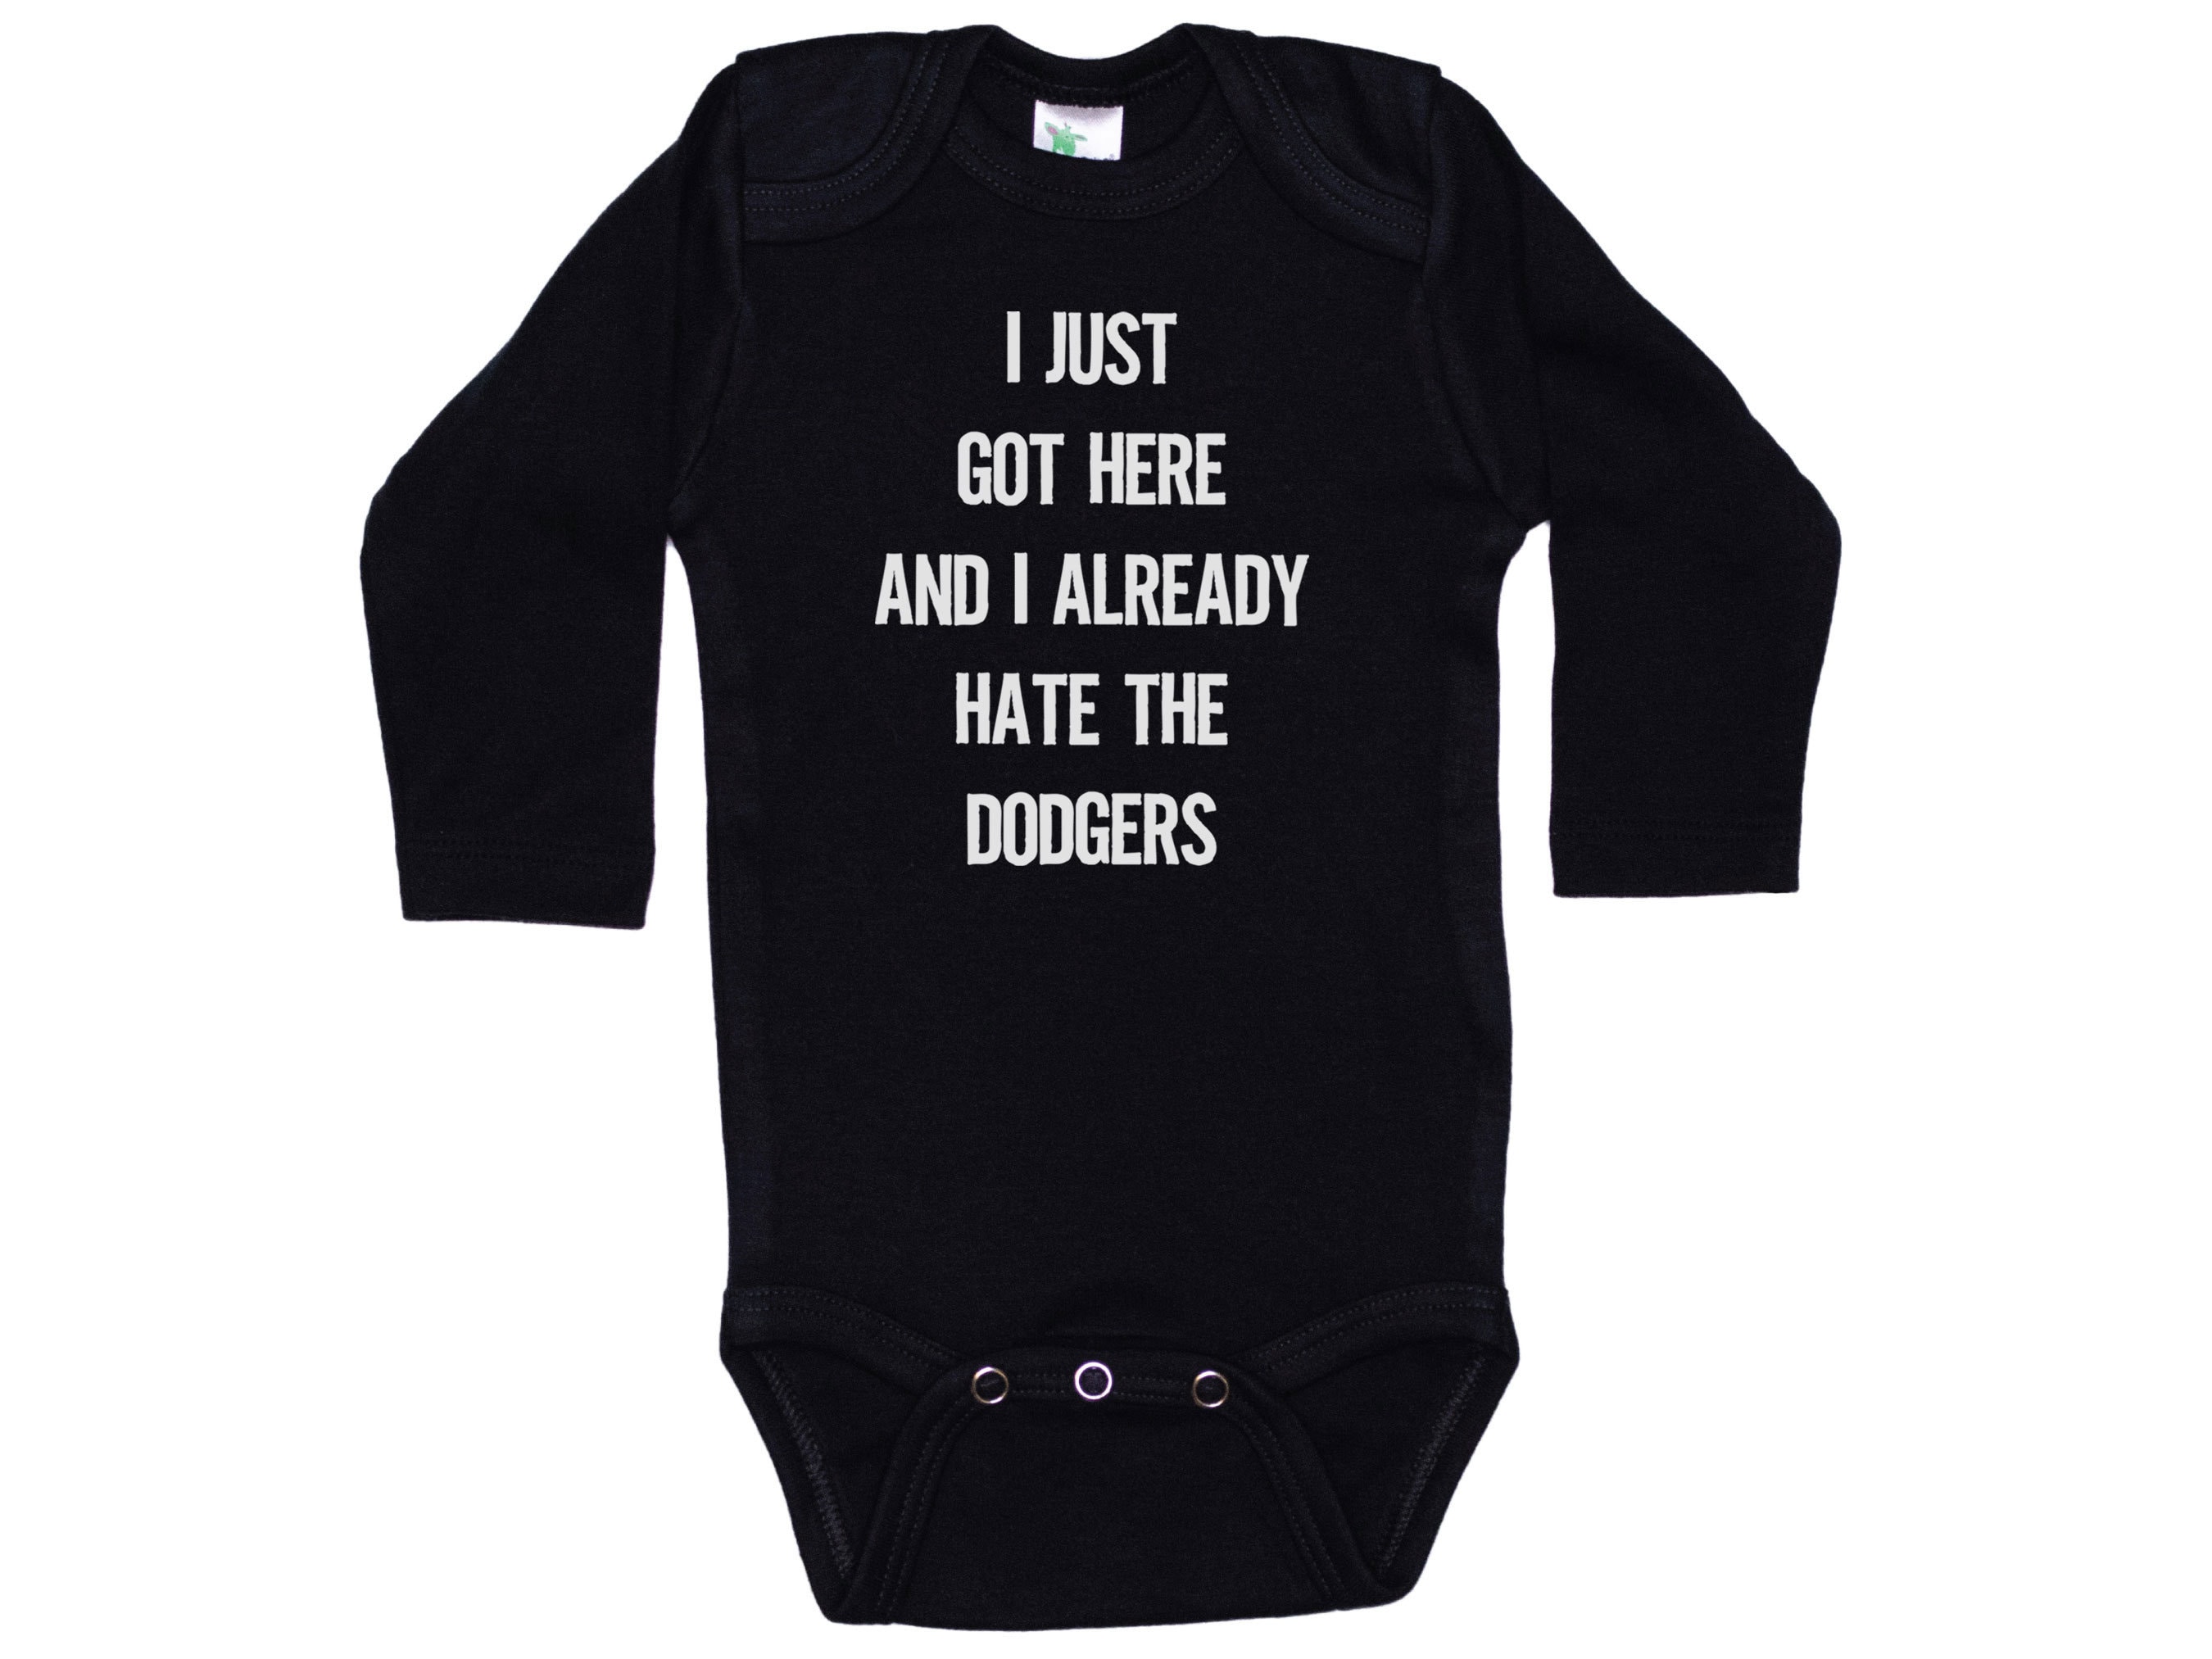 Giants Onesie®, I Just Got Here and I Already Hate the Dodgers